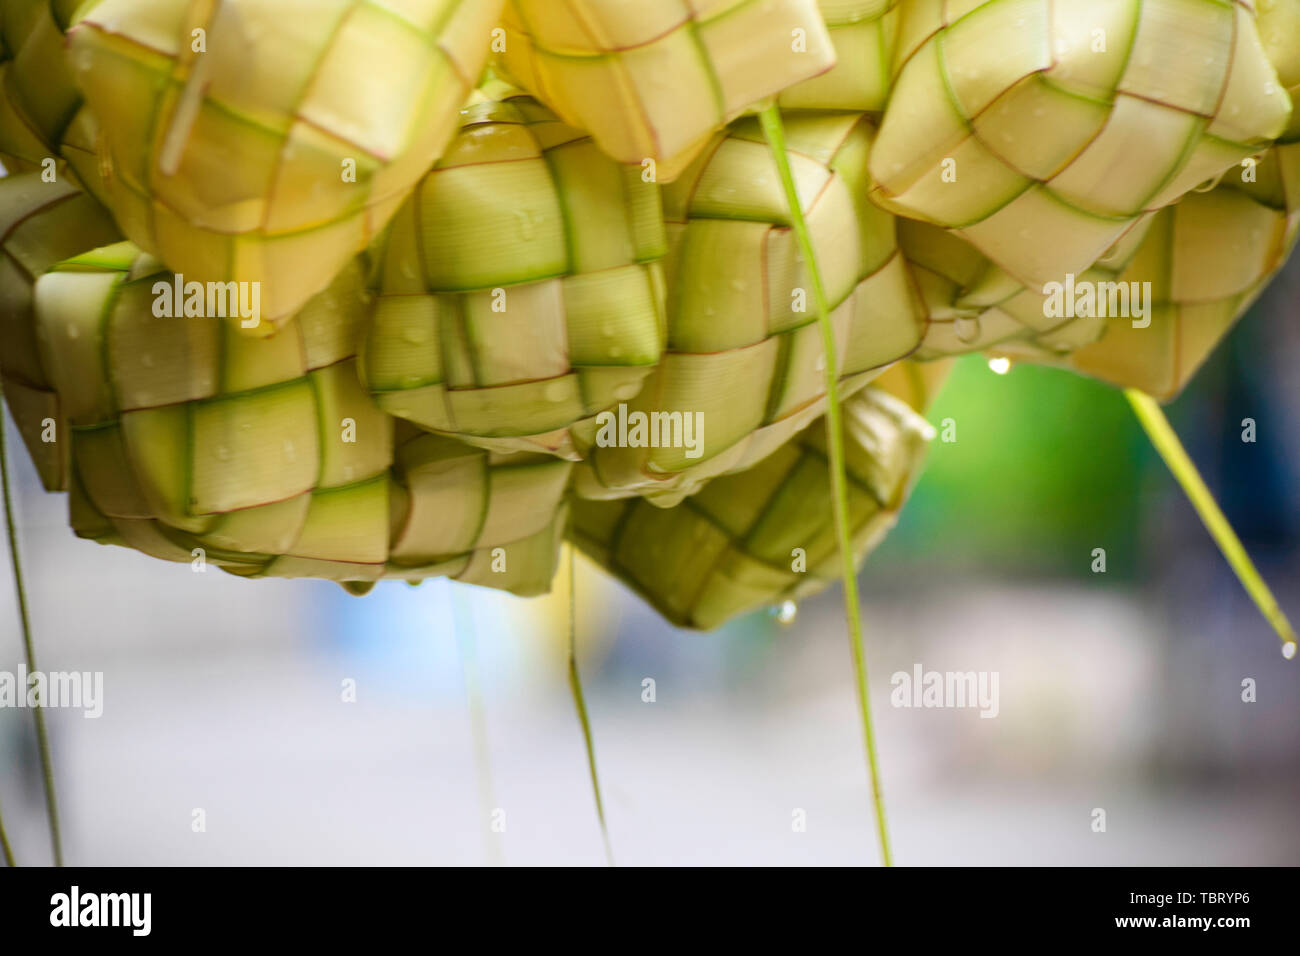 Ketupat 'asian rice dumpling'. Ketupat is a natural rice casing made from young coconut leaves for cooking rice during eid Mubarak Eid ul Fitr Stock Photo